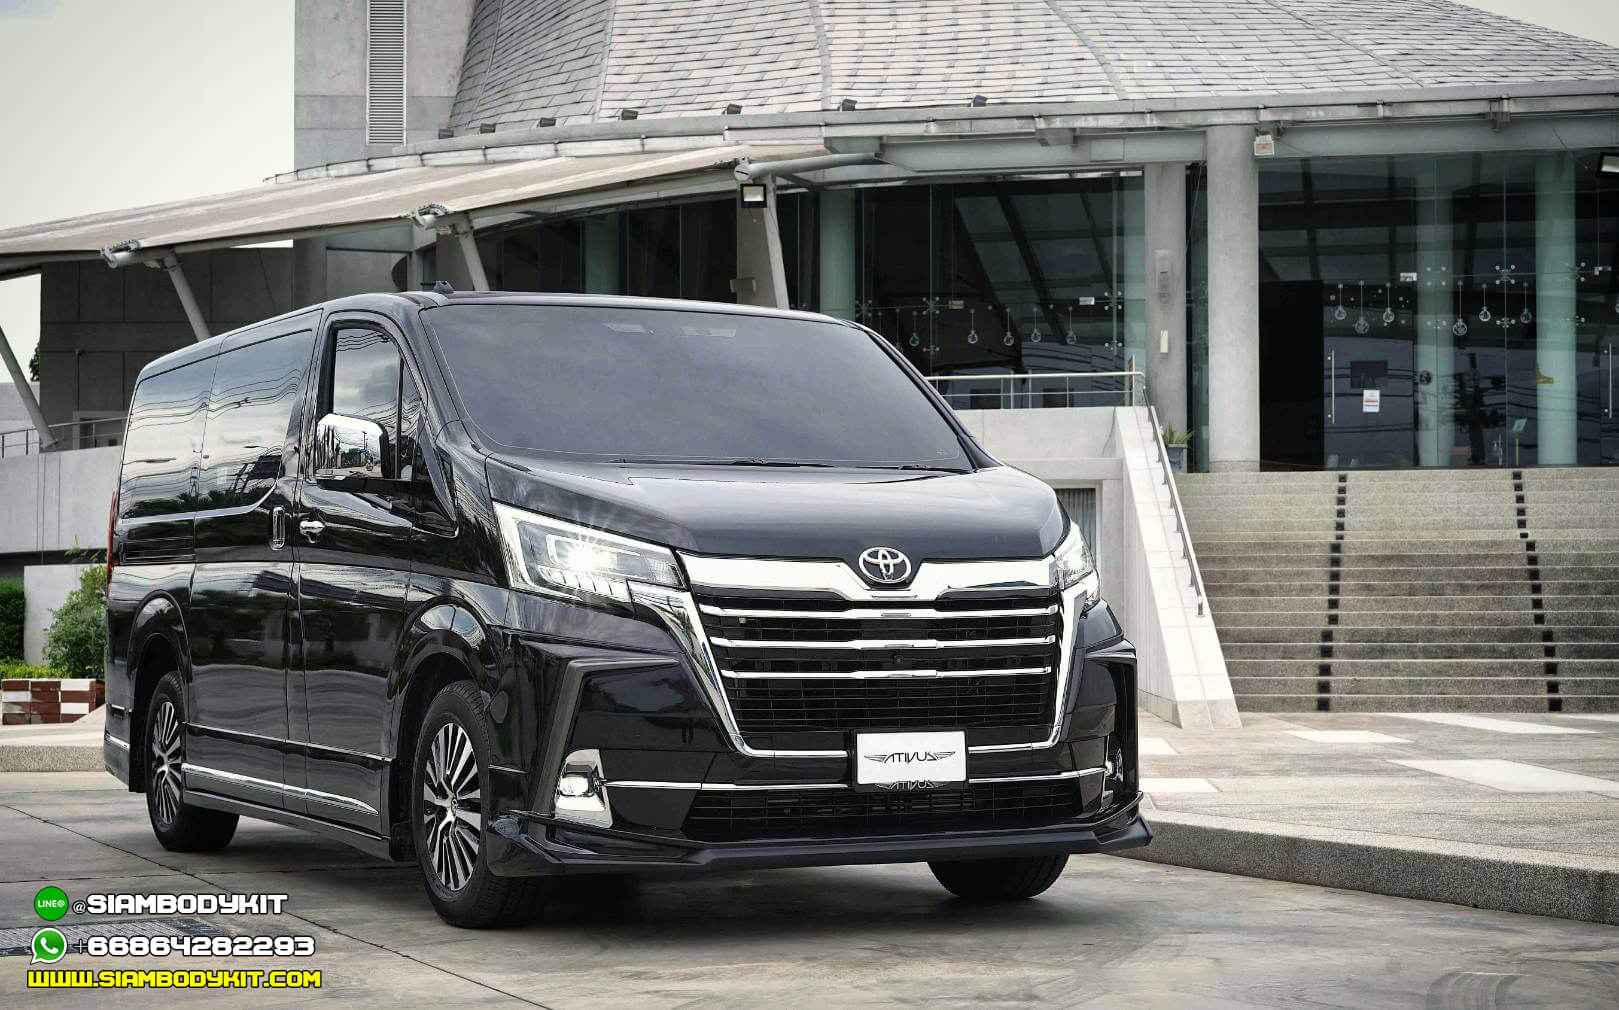 ATIVUS Bodykit for Toyota Majesty 2019-2020 (COLOR)